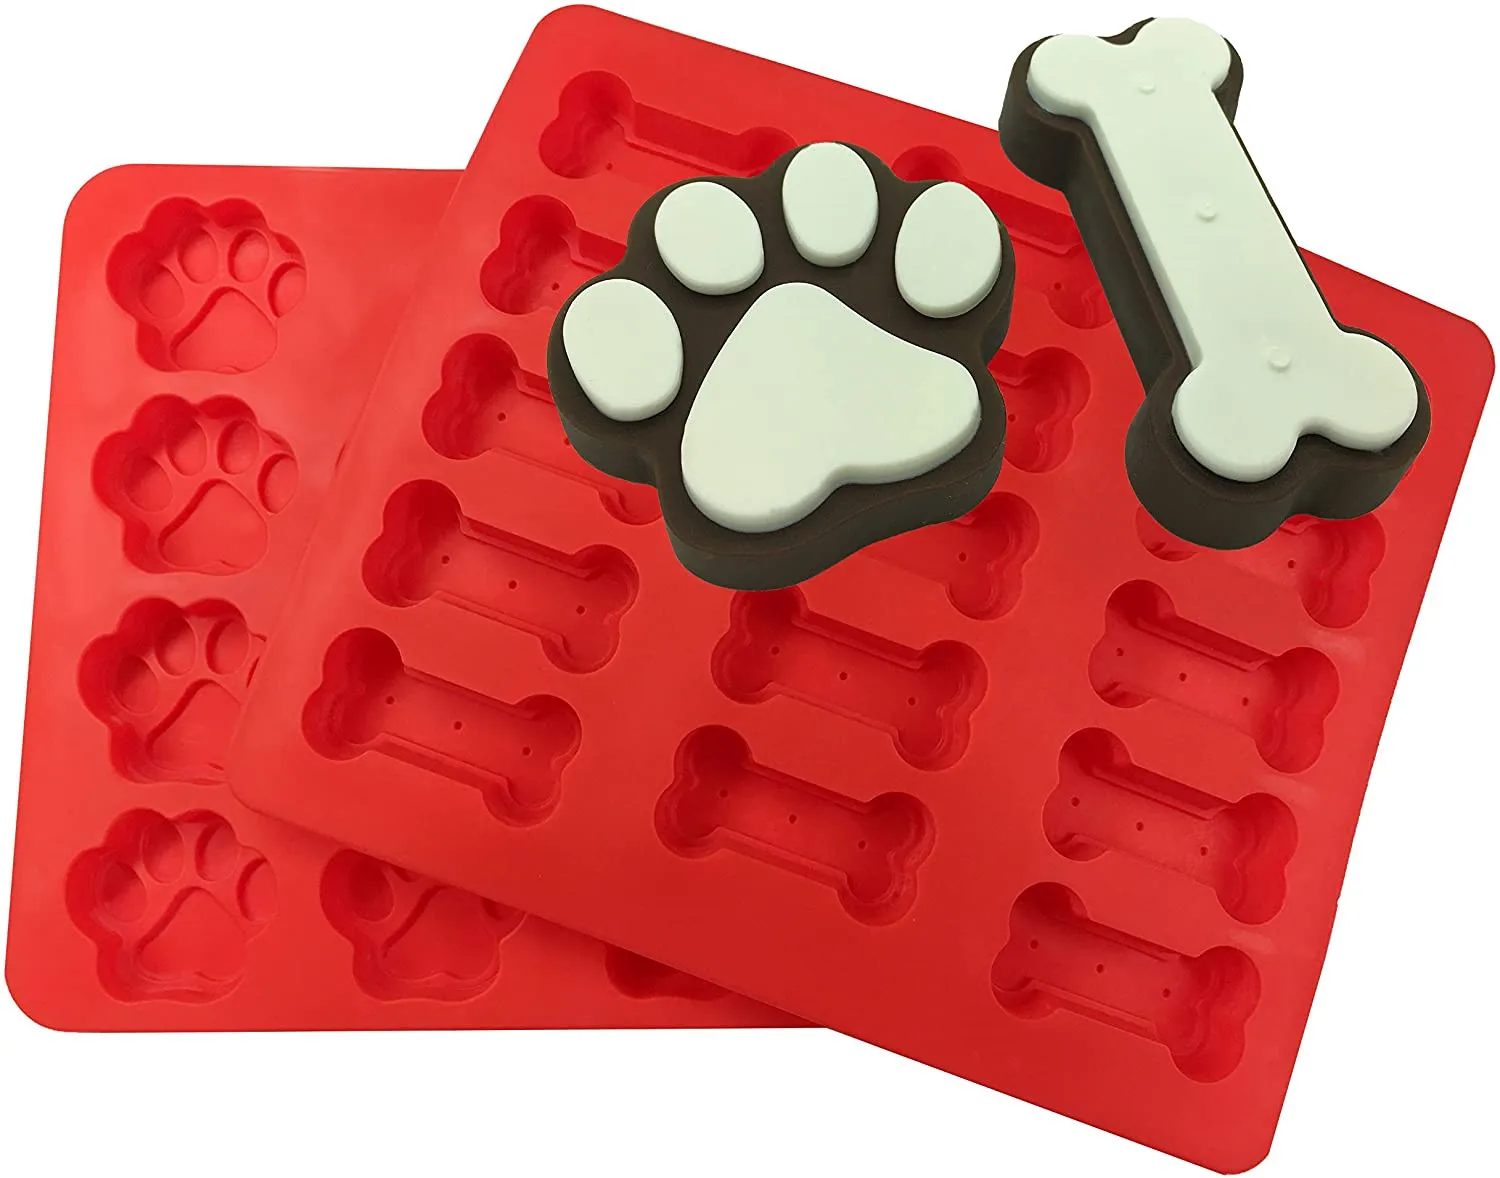 Dog Paw and Bone Silicone Molds,Non-Stick Food Grade Silicone Molds for Chocolate Cake molds Ice Cube,Customized